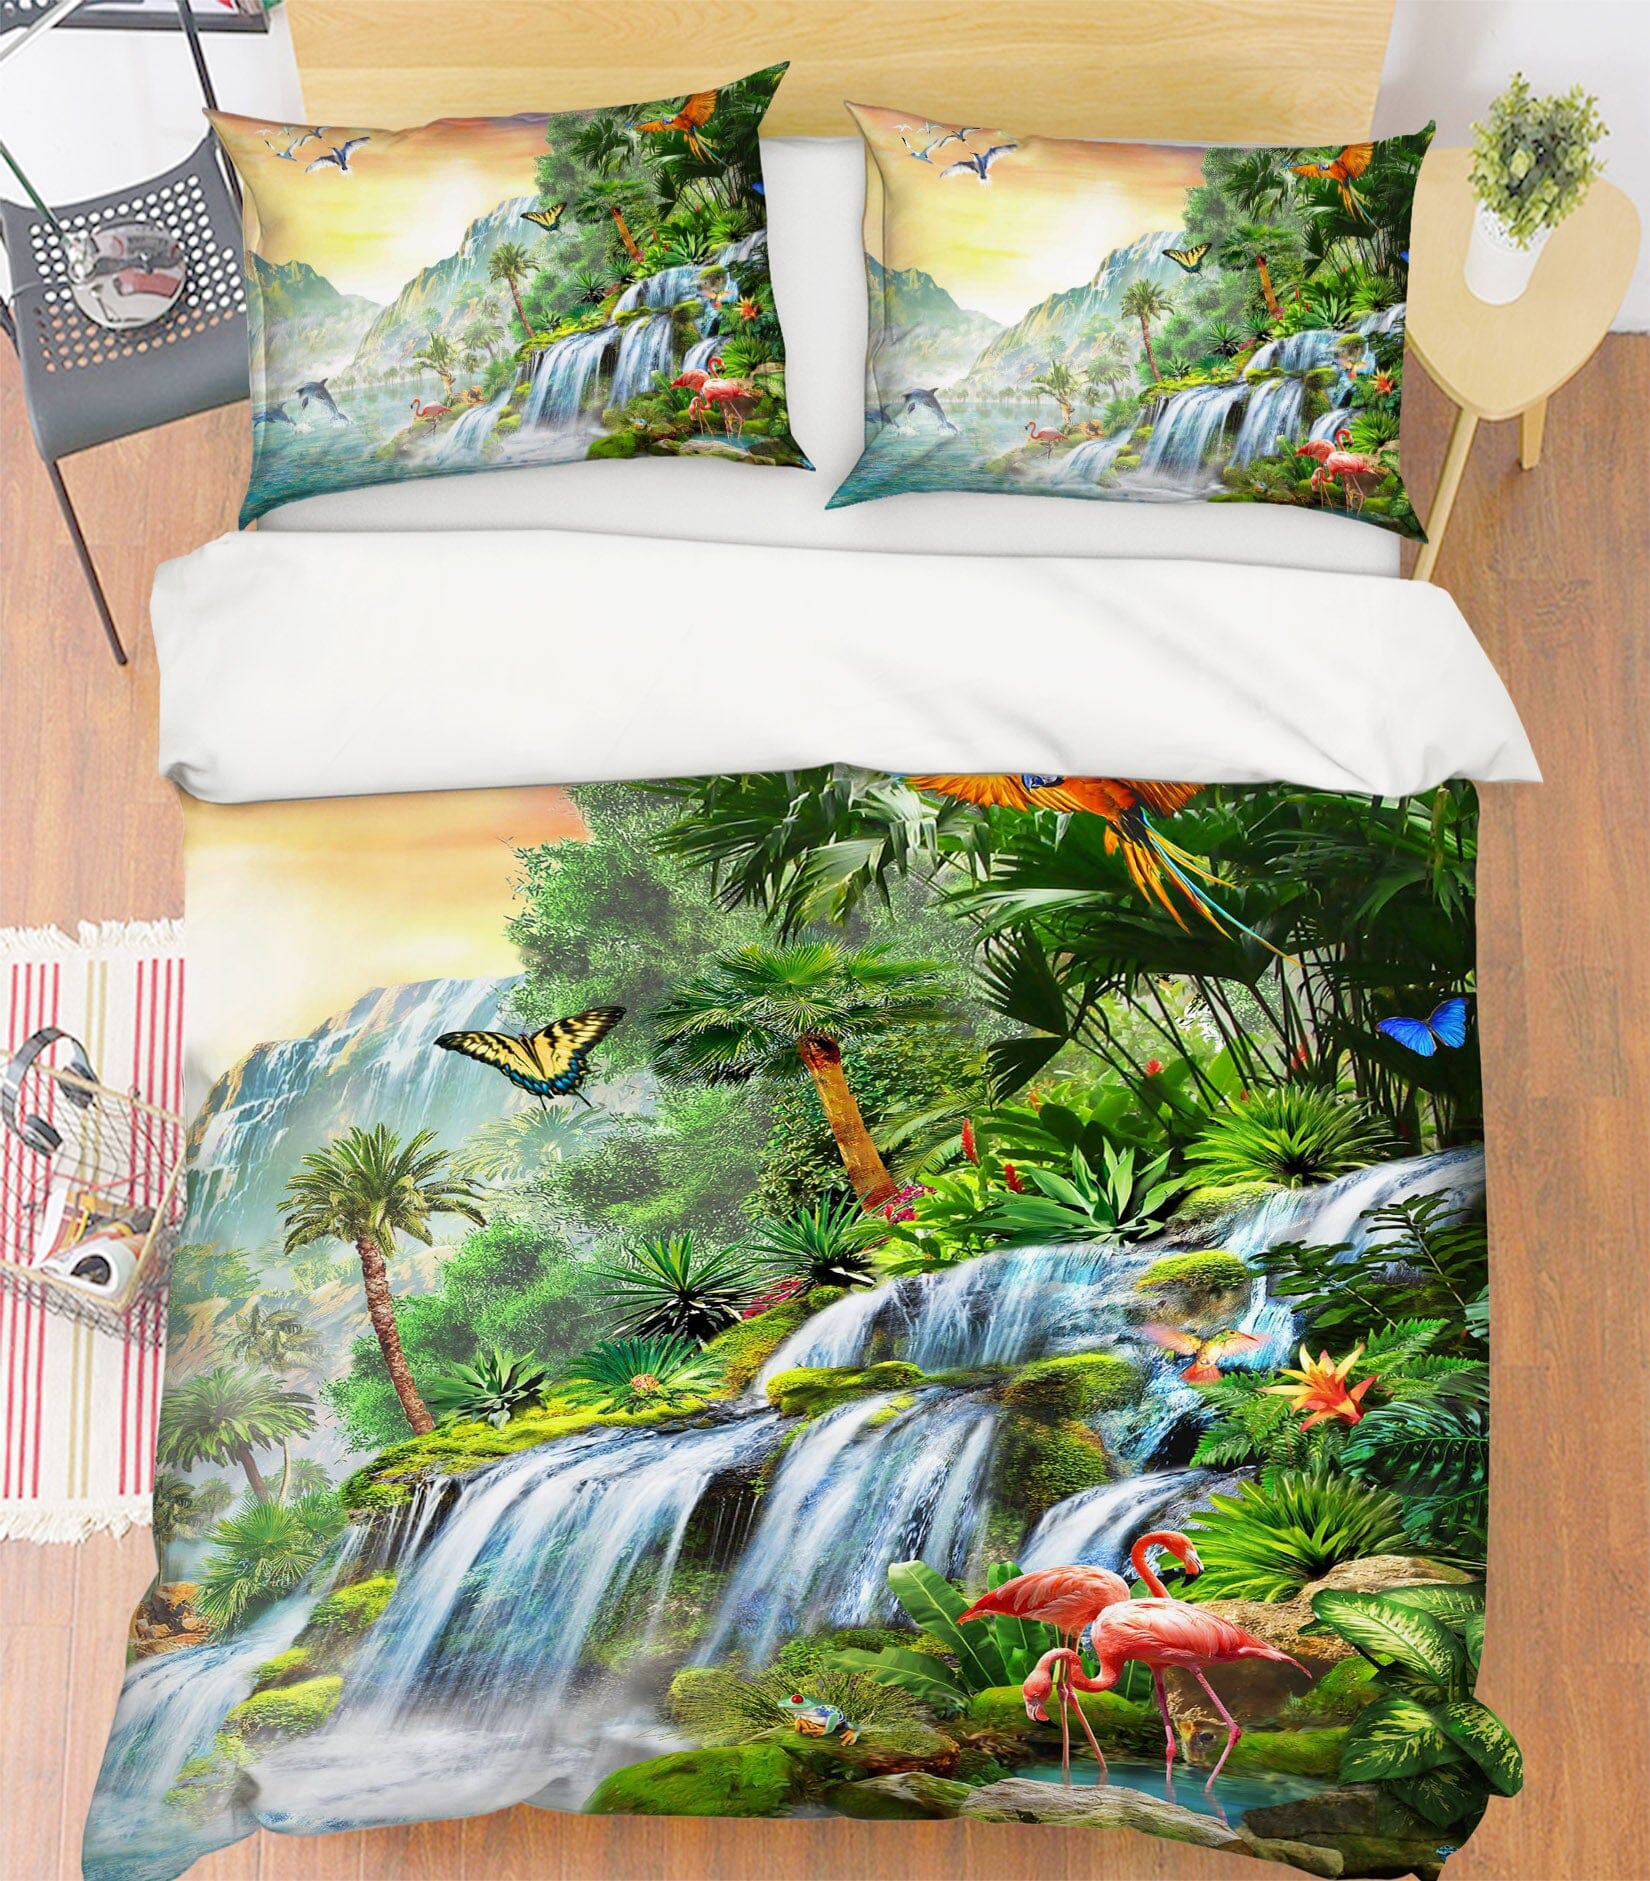 3D Forest Waterfall 2119 Adrian Chesterman Bedding Bed Pillowcases Quilt Quiet Covers AJ Creativity Home 